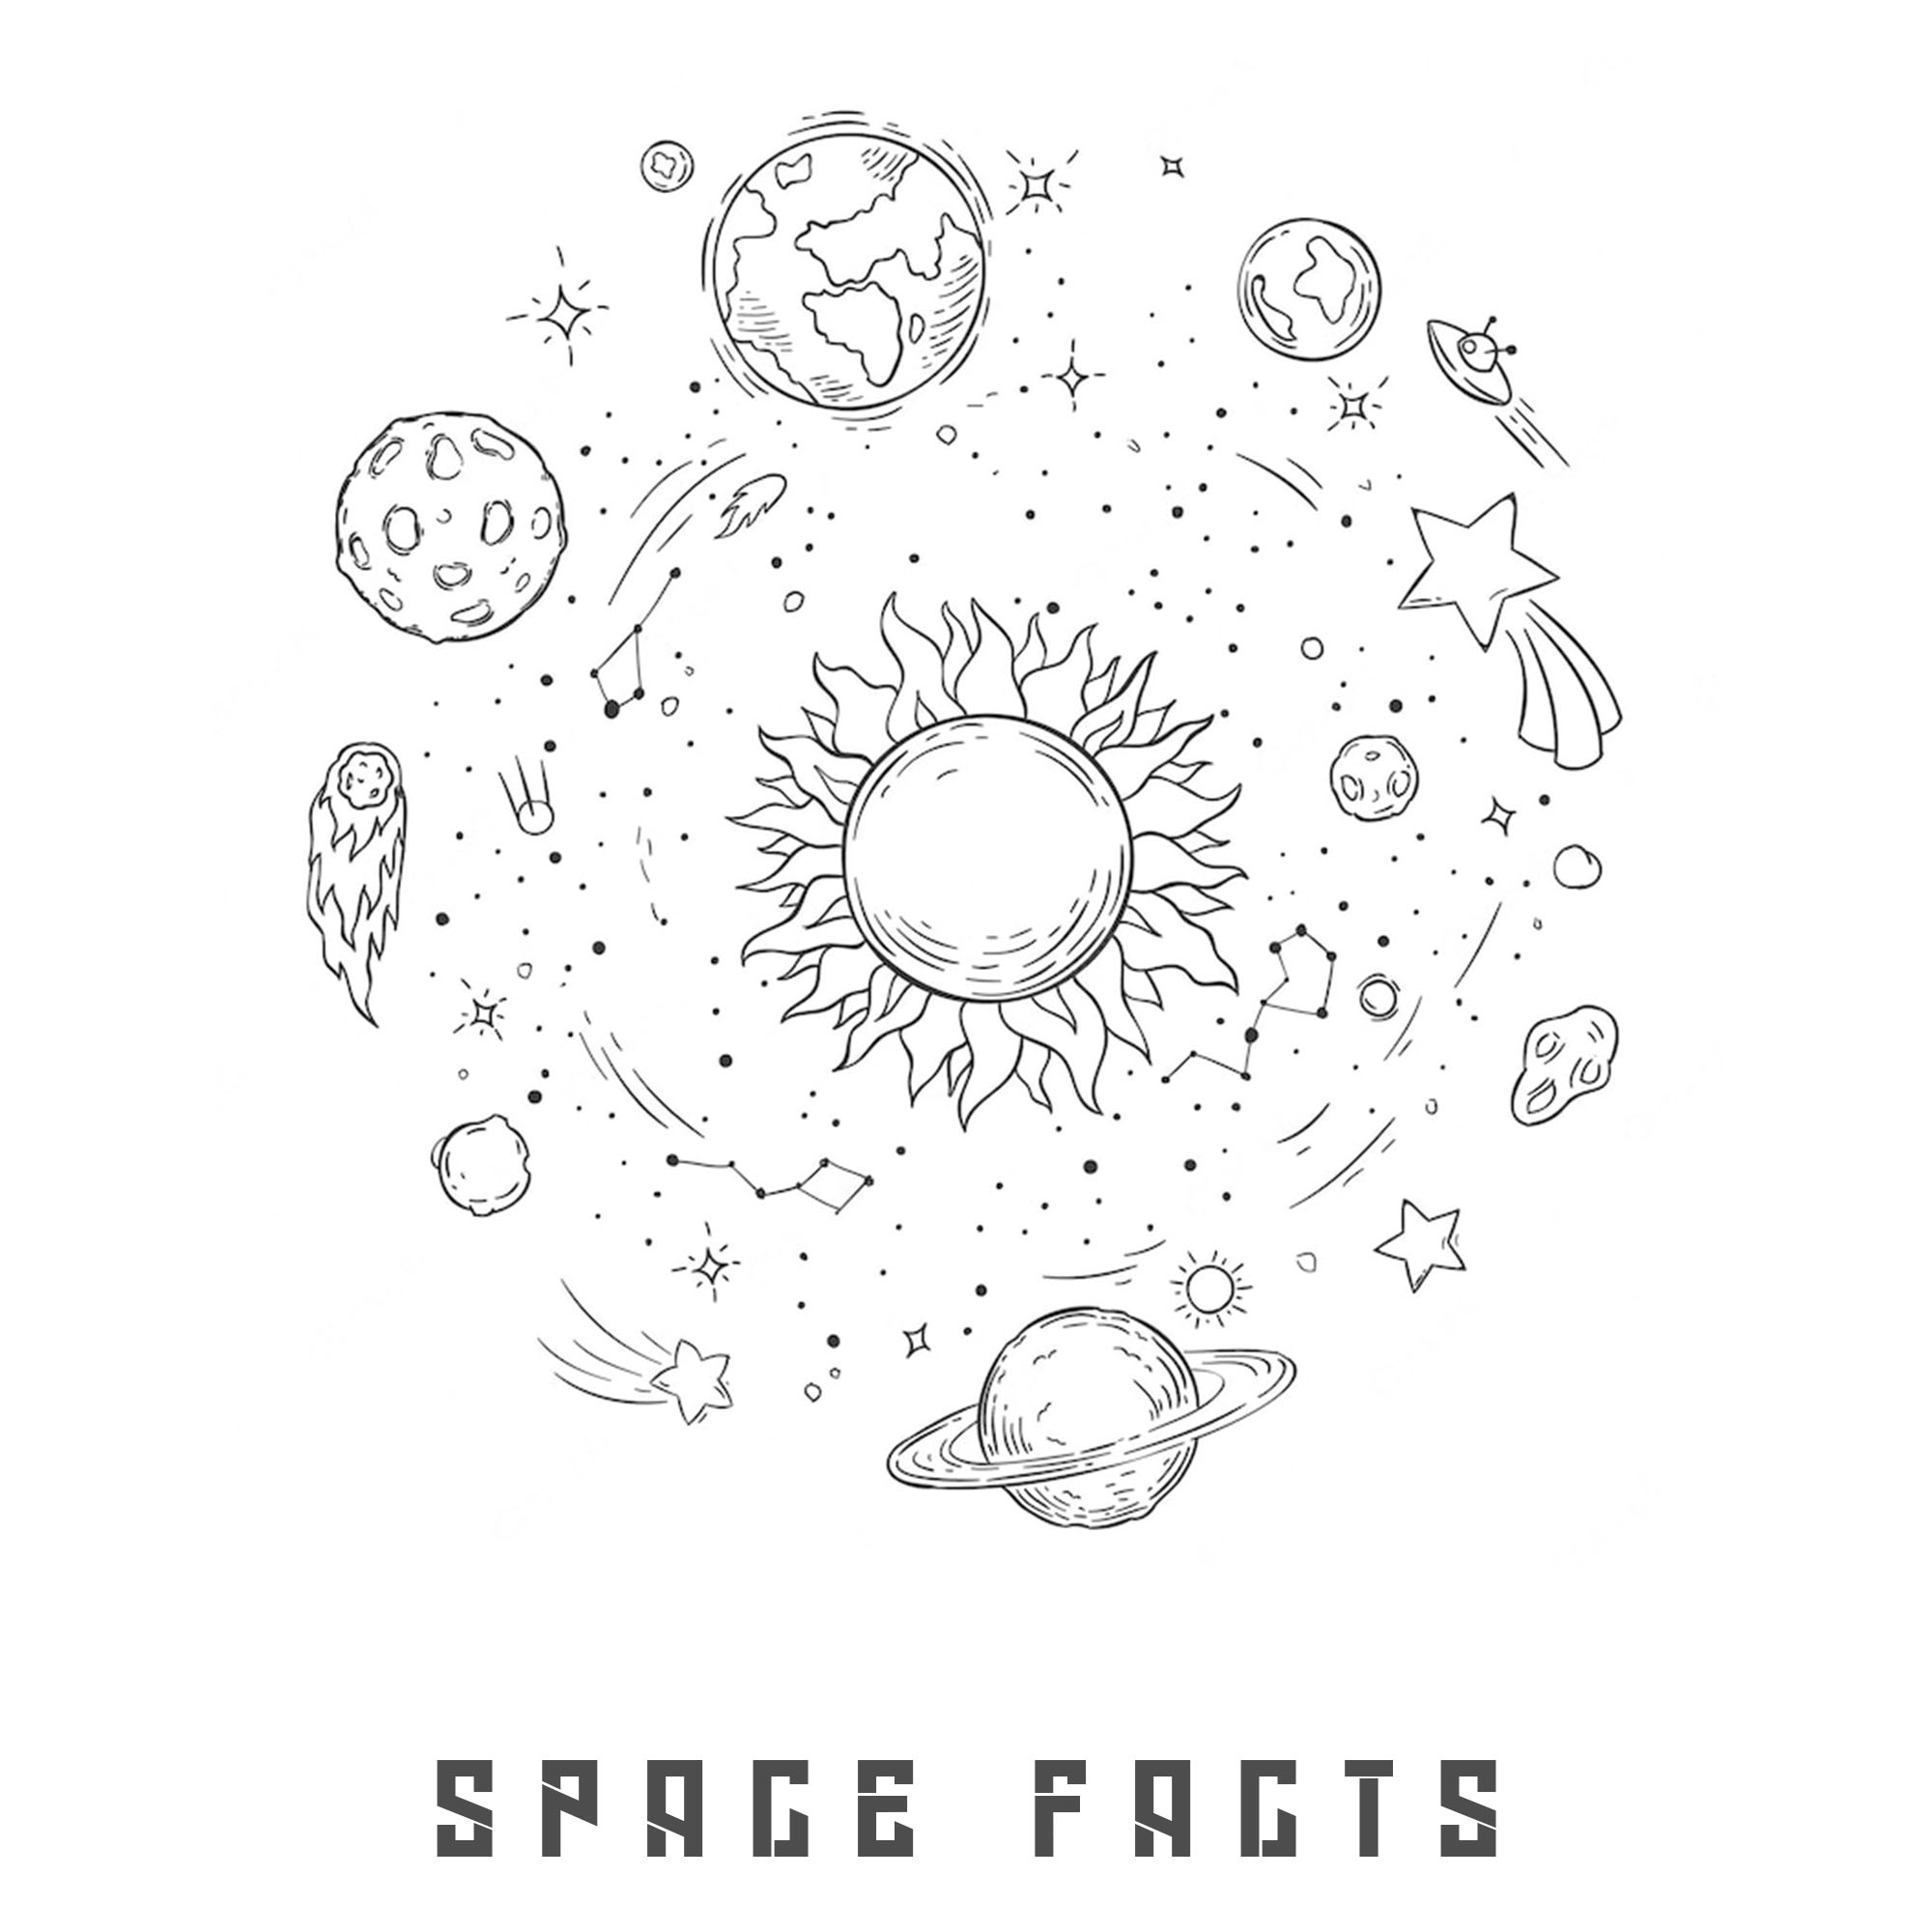 pin-on-space-facts